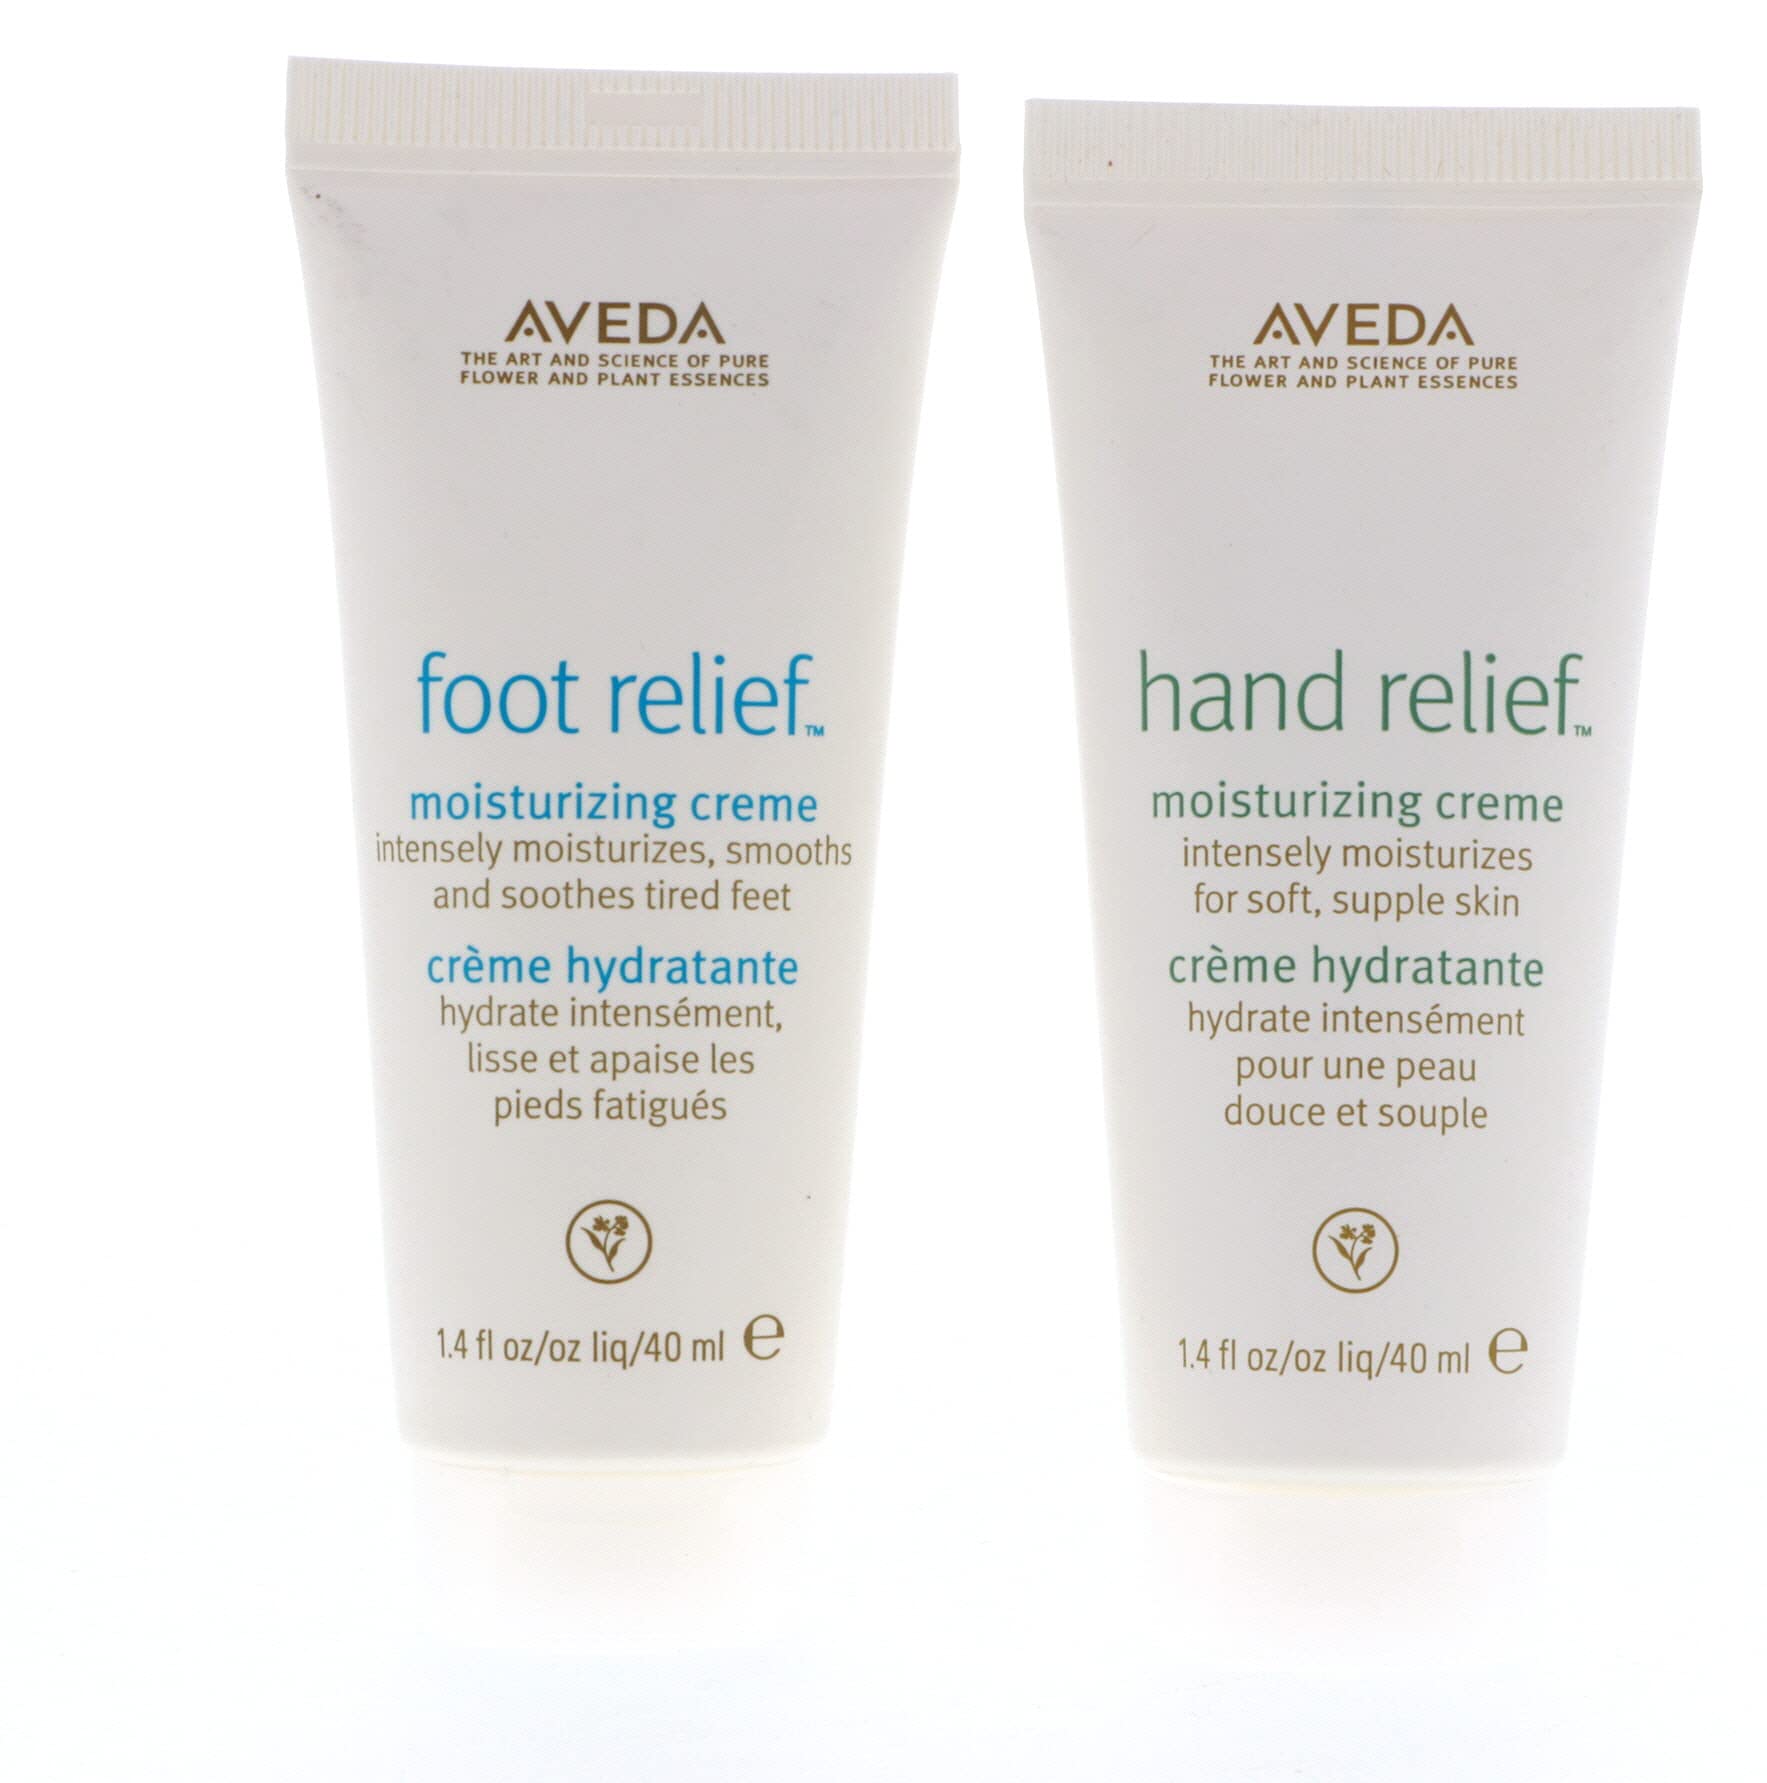 Aveda Hand Relief and Foot Relief Moisturizing Creme Set, 2.8 Ounce